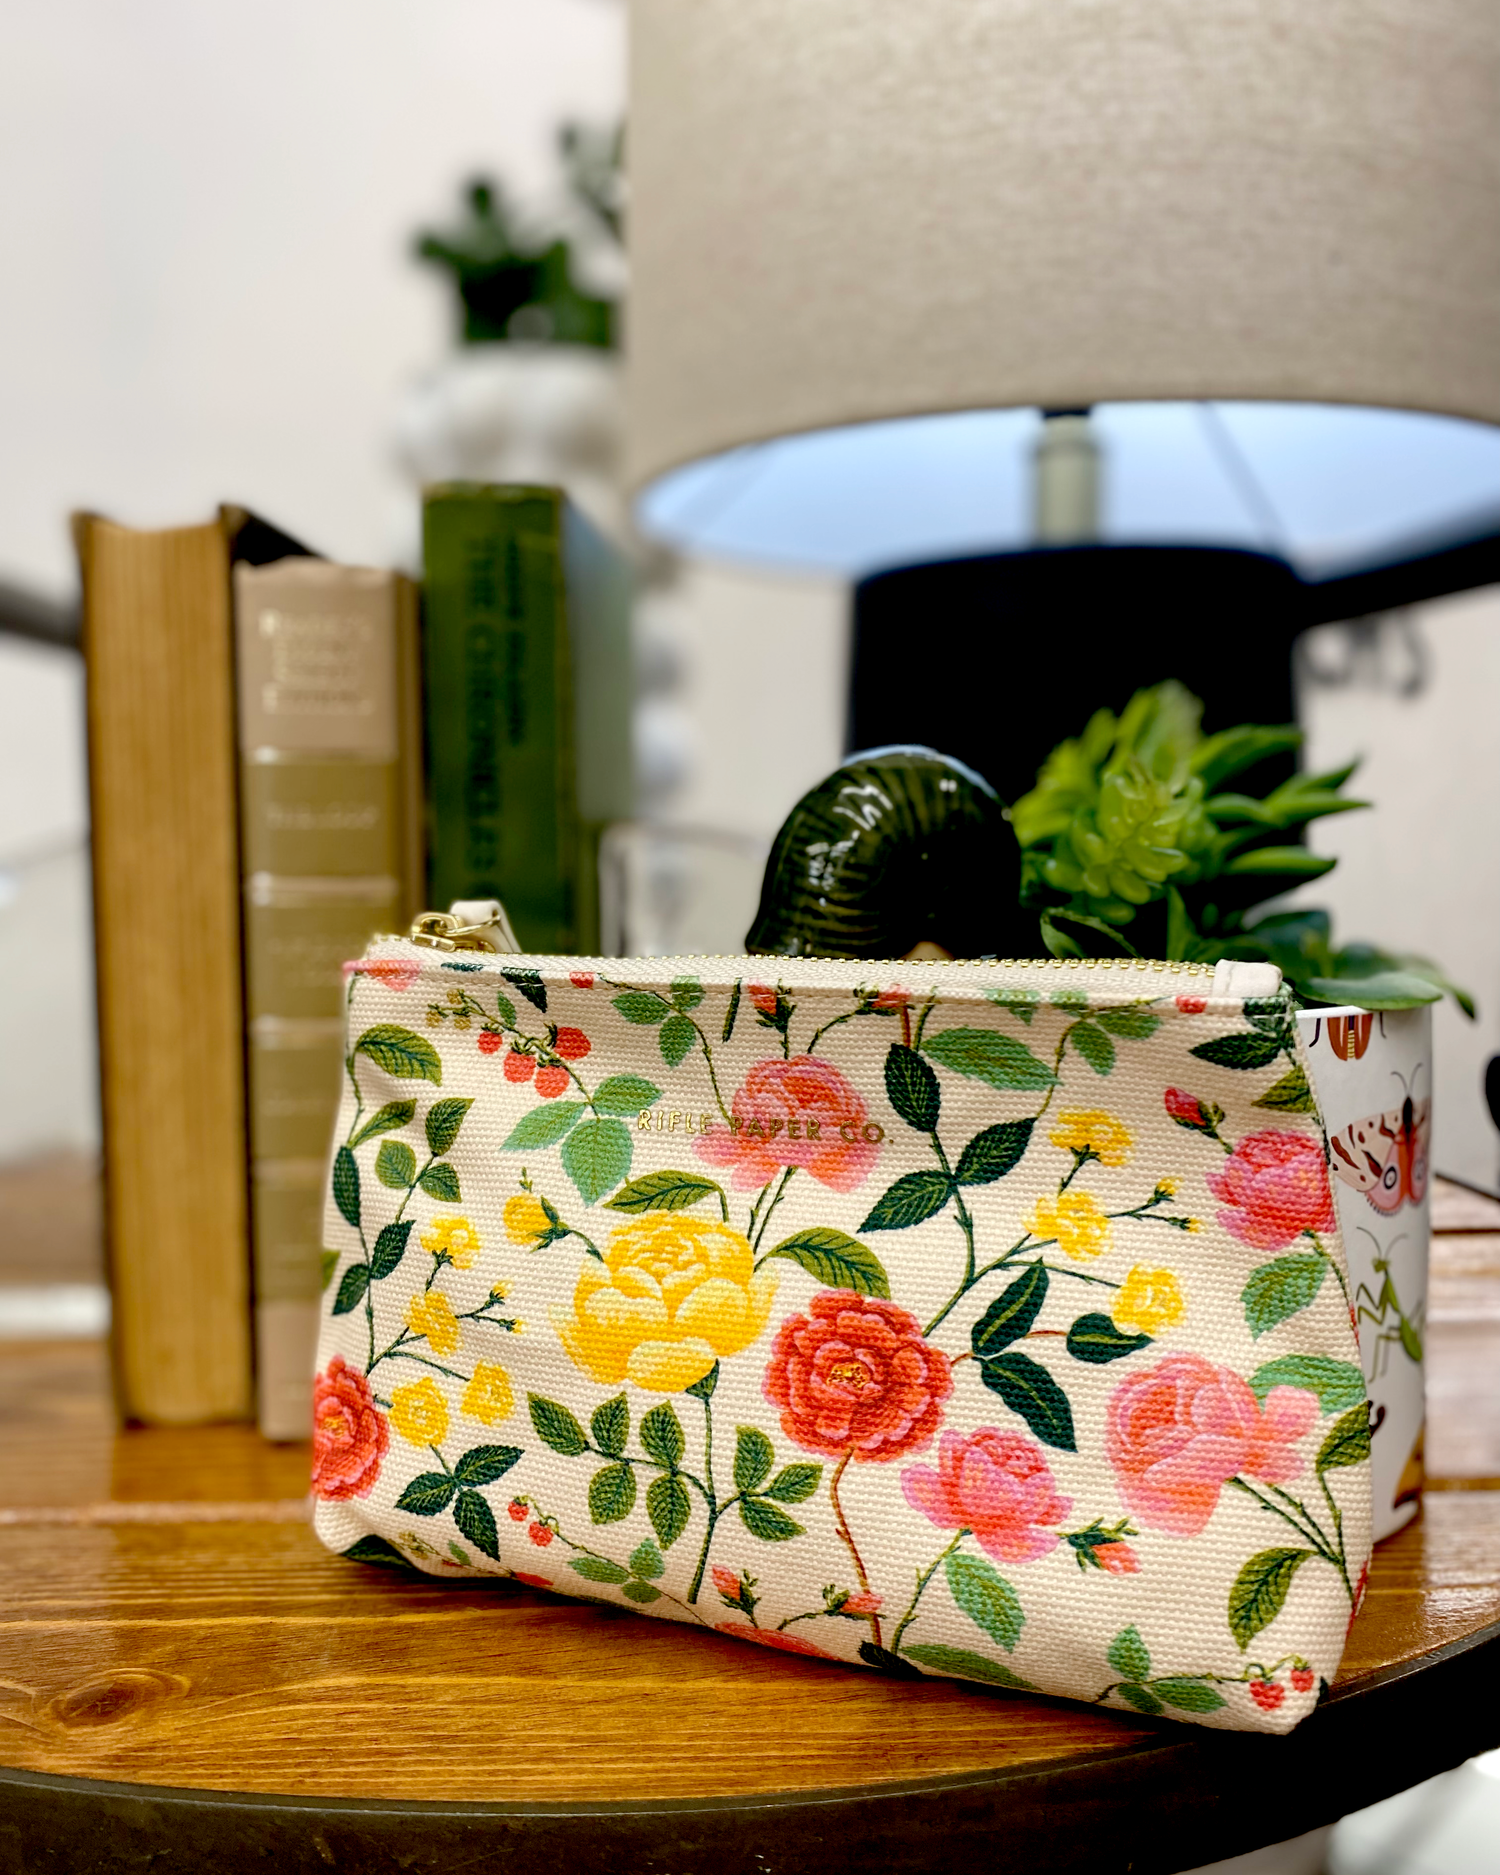 rifle paper co make up bag with floral print